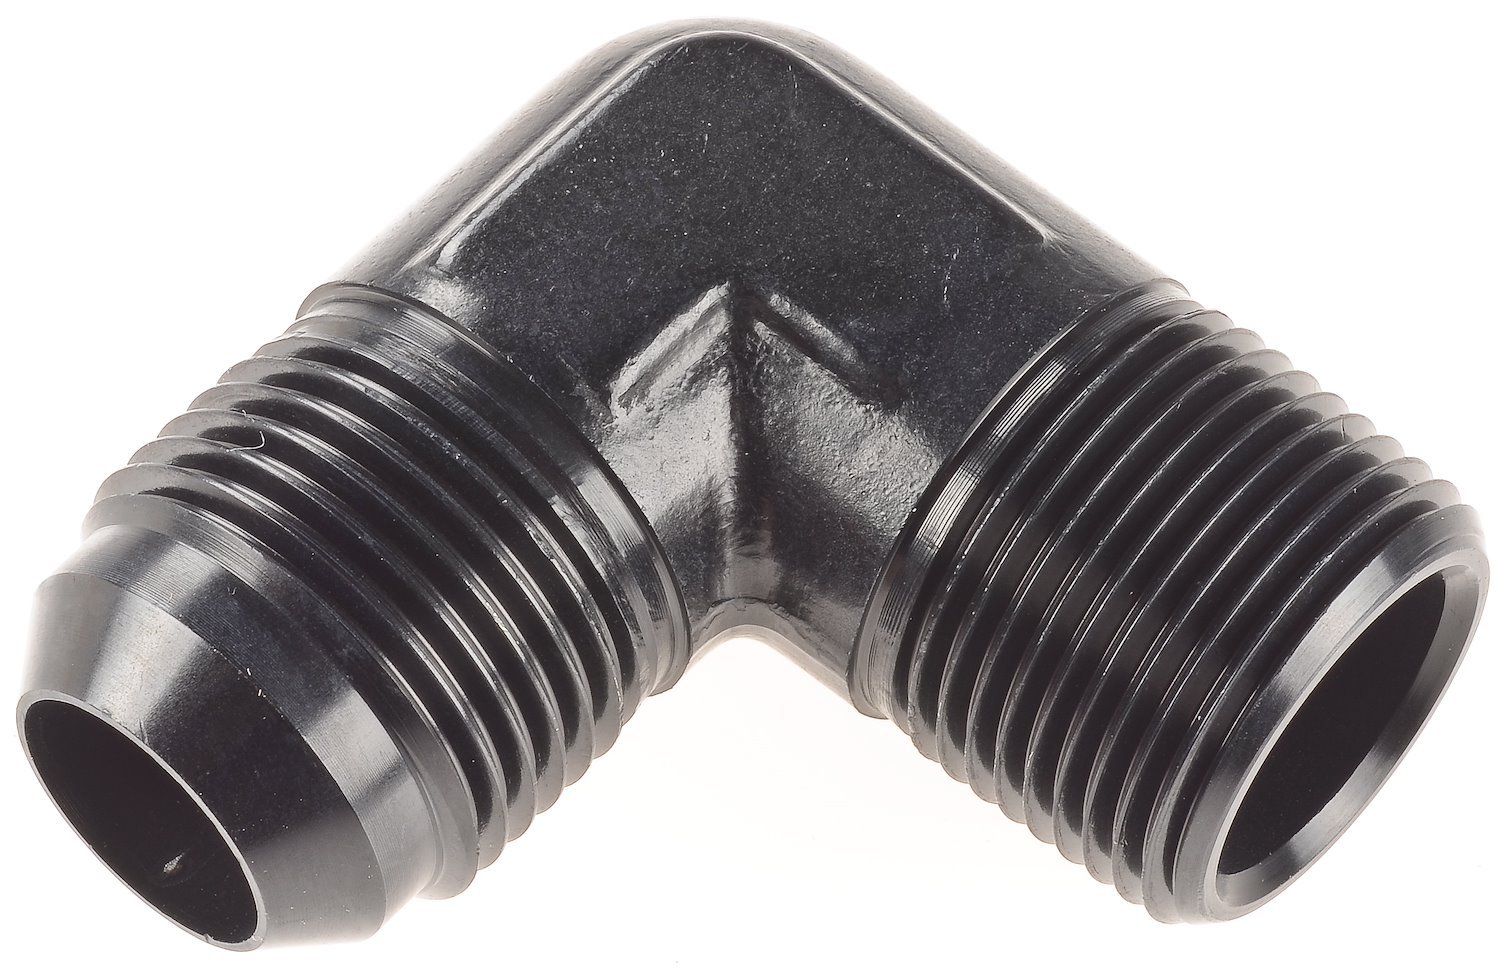 AN to NPT 90-Degree Adapter Fitting [-12 AN Male to 3/4 in. NPT Male, Black]